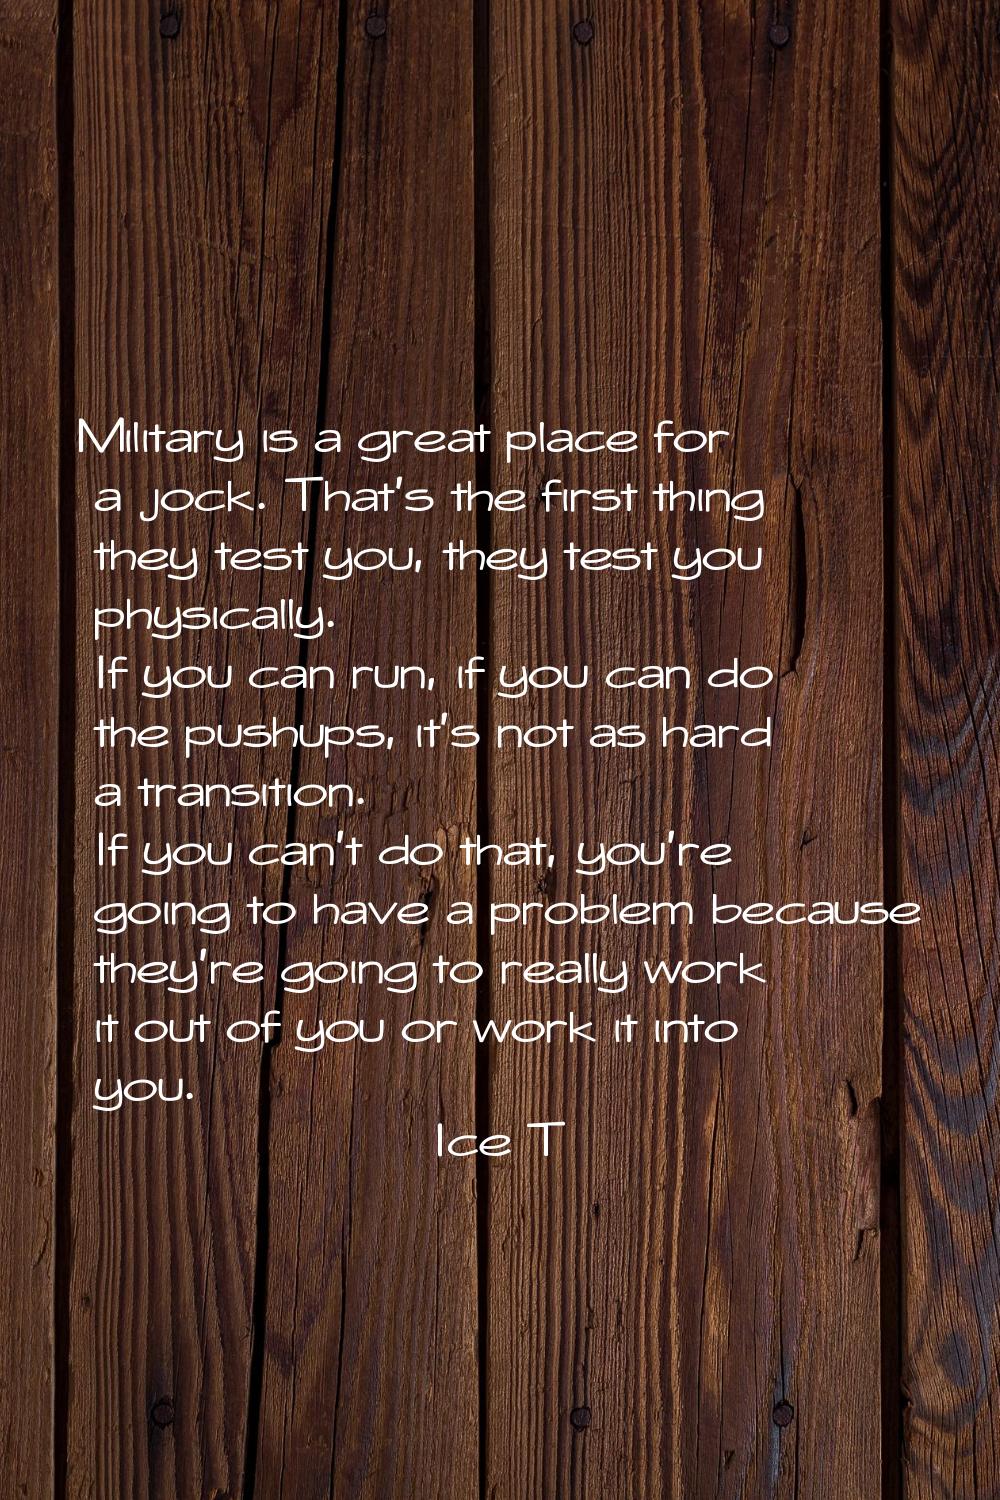 Military is a great place for a jock. That's the first thing they test you, they test you physicall